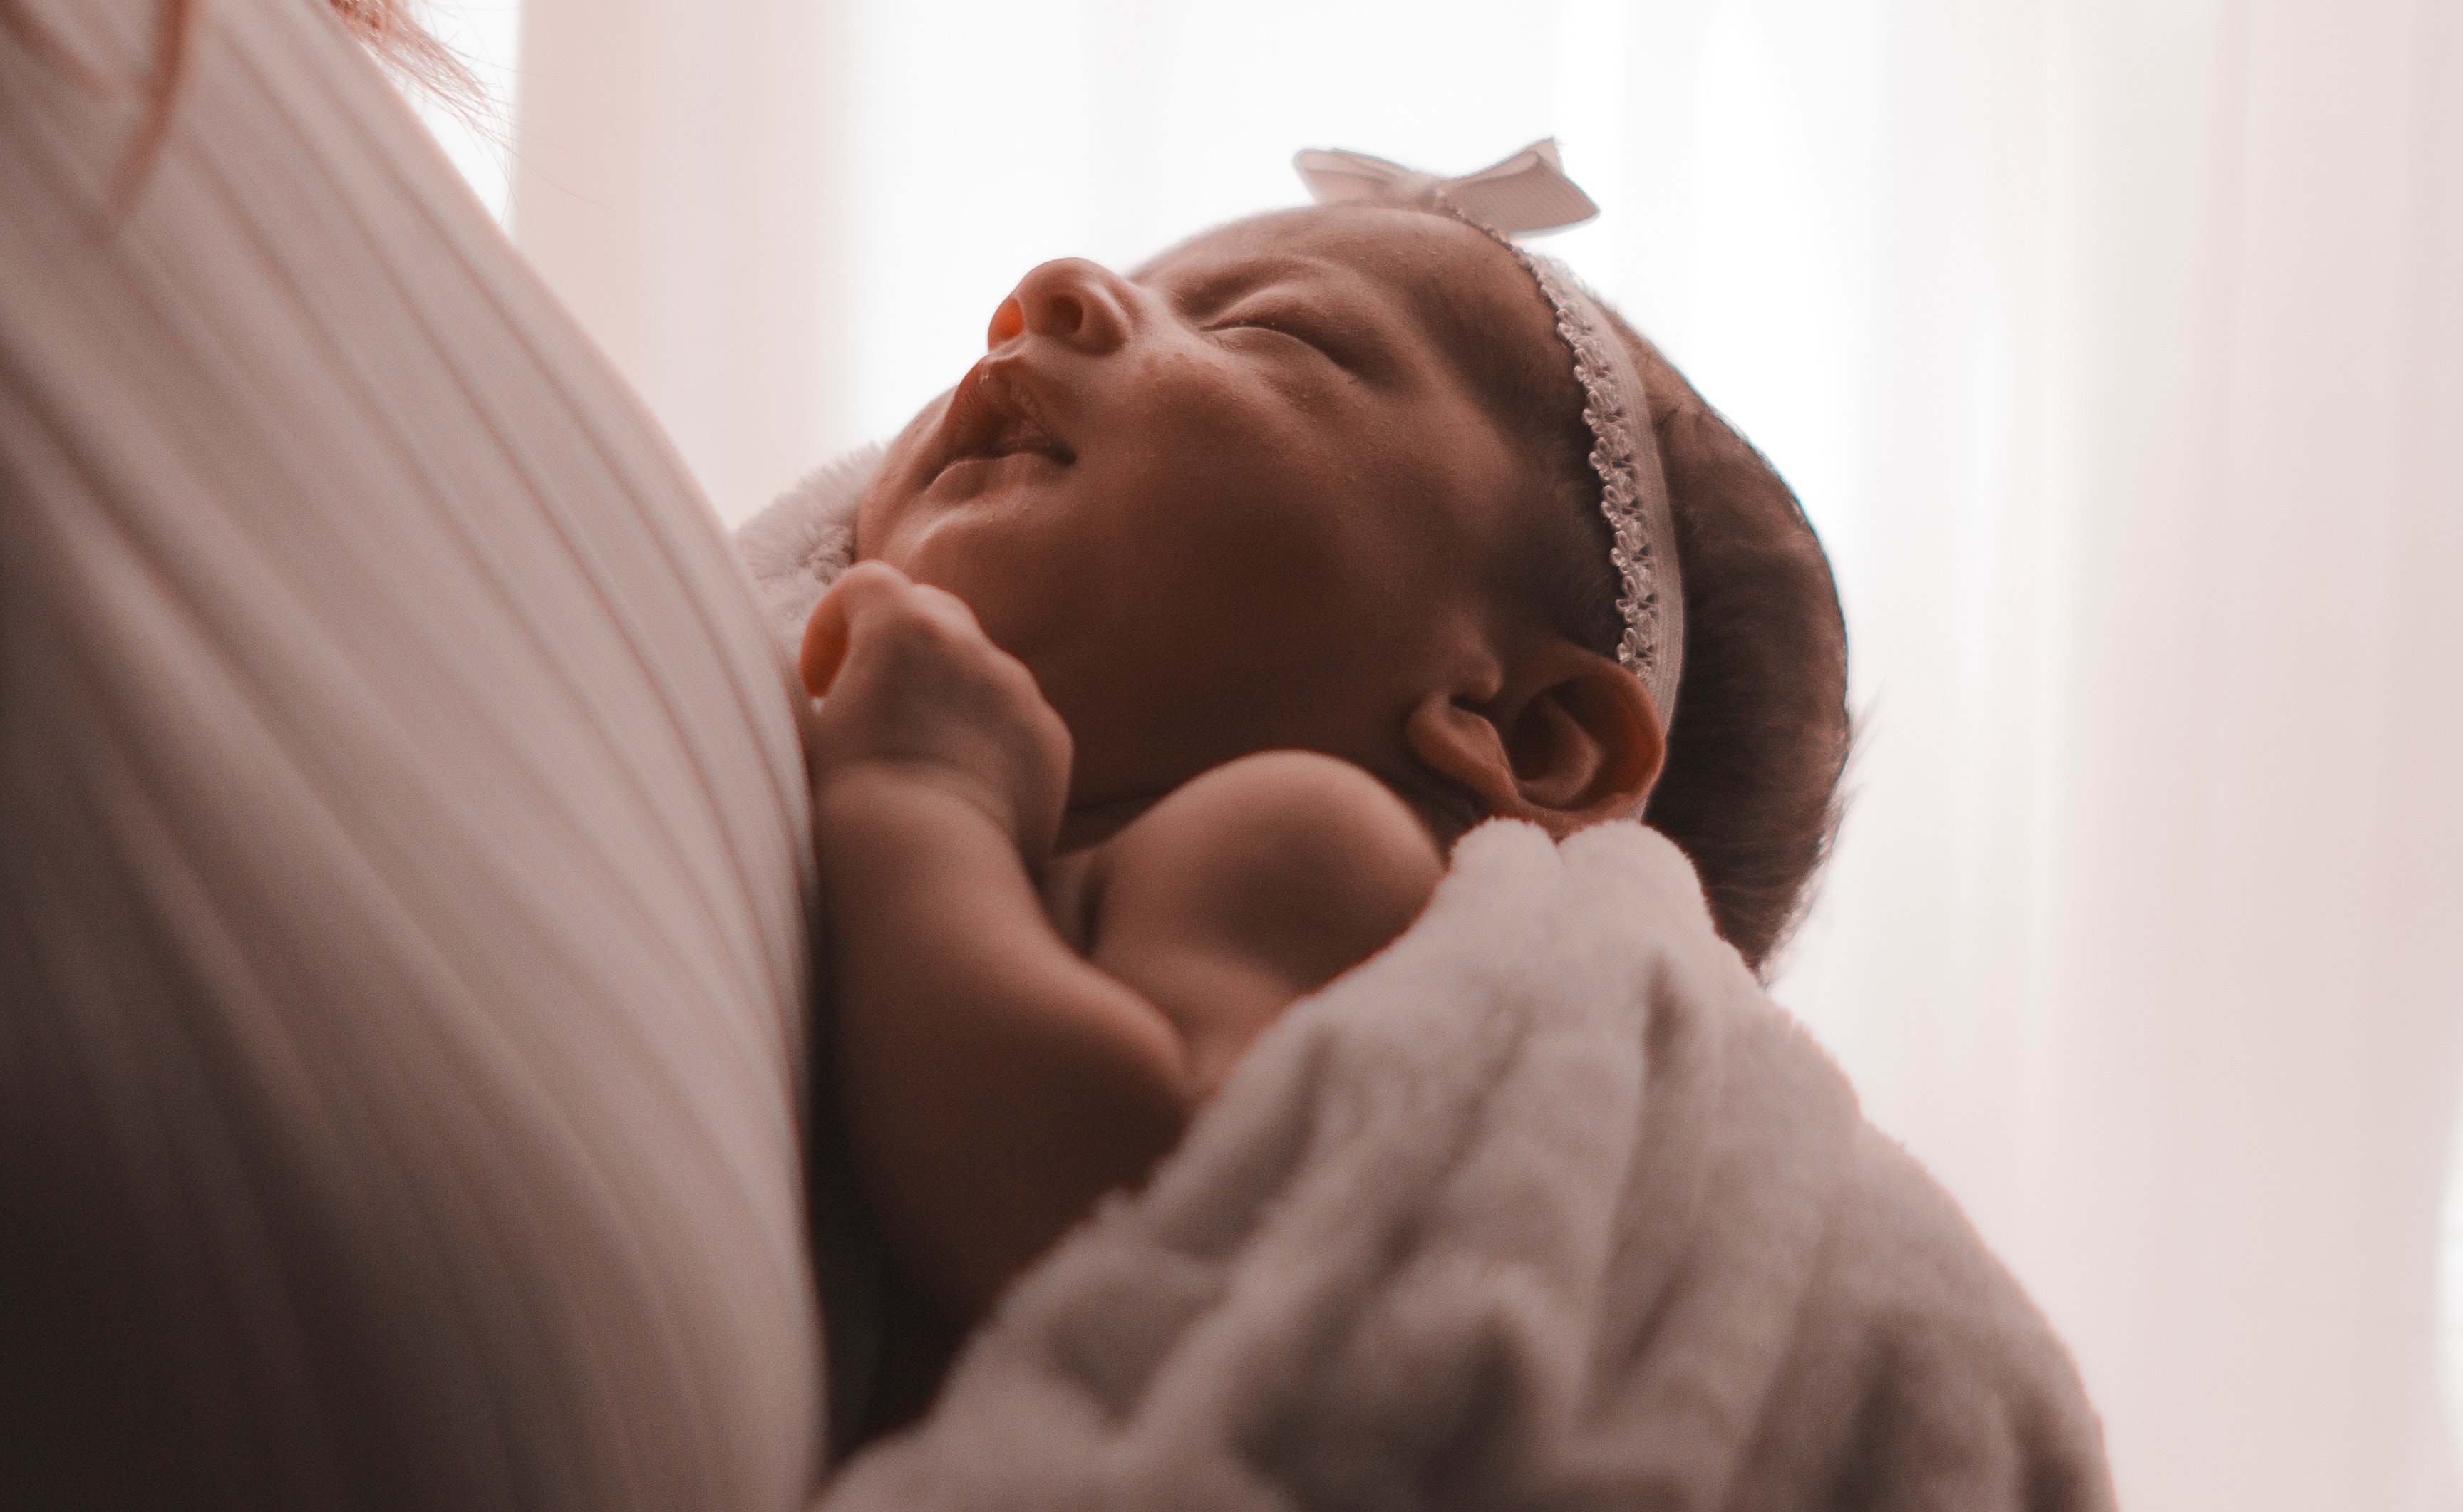 A newborn baby girl held by her mother | Source: Pexels